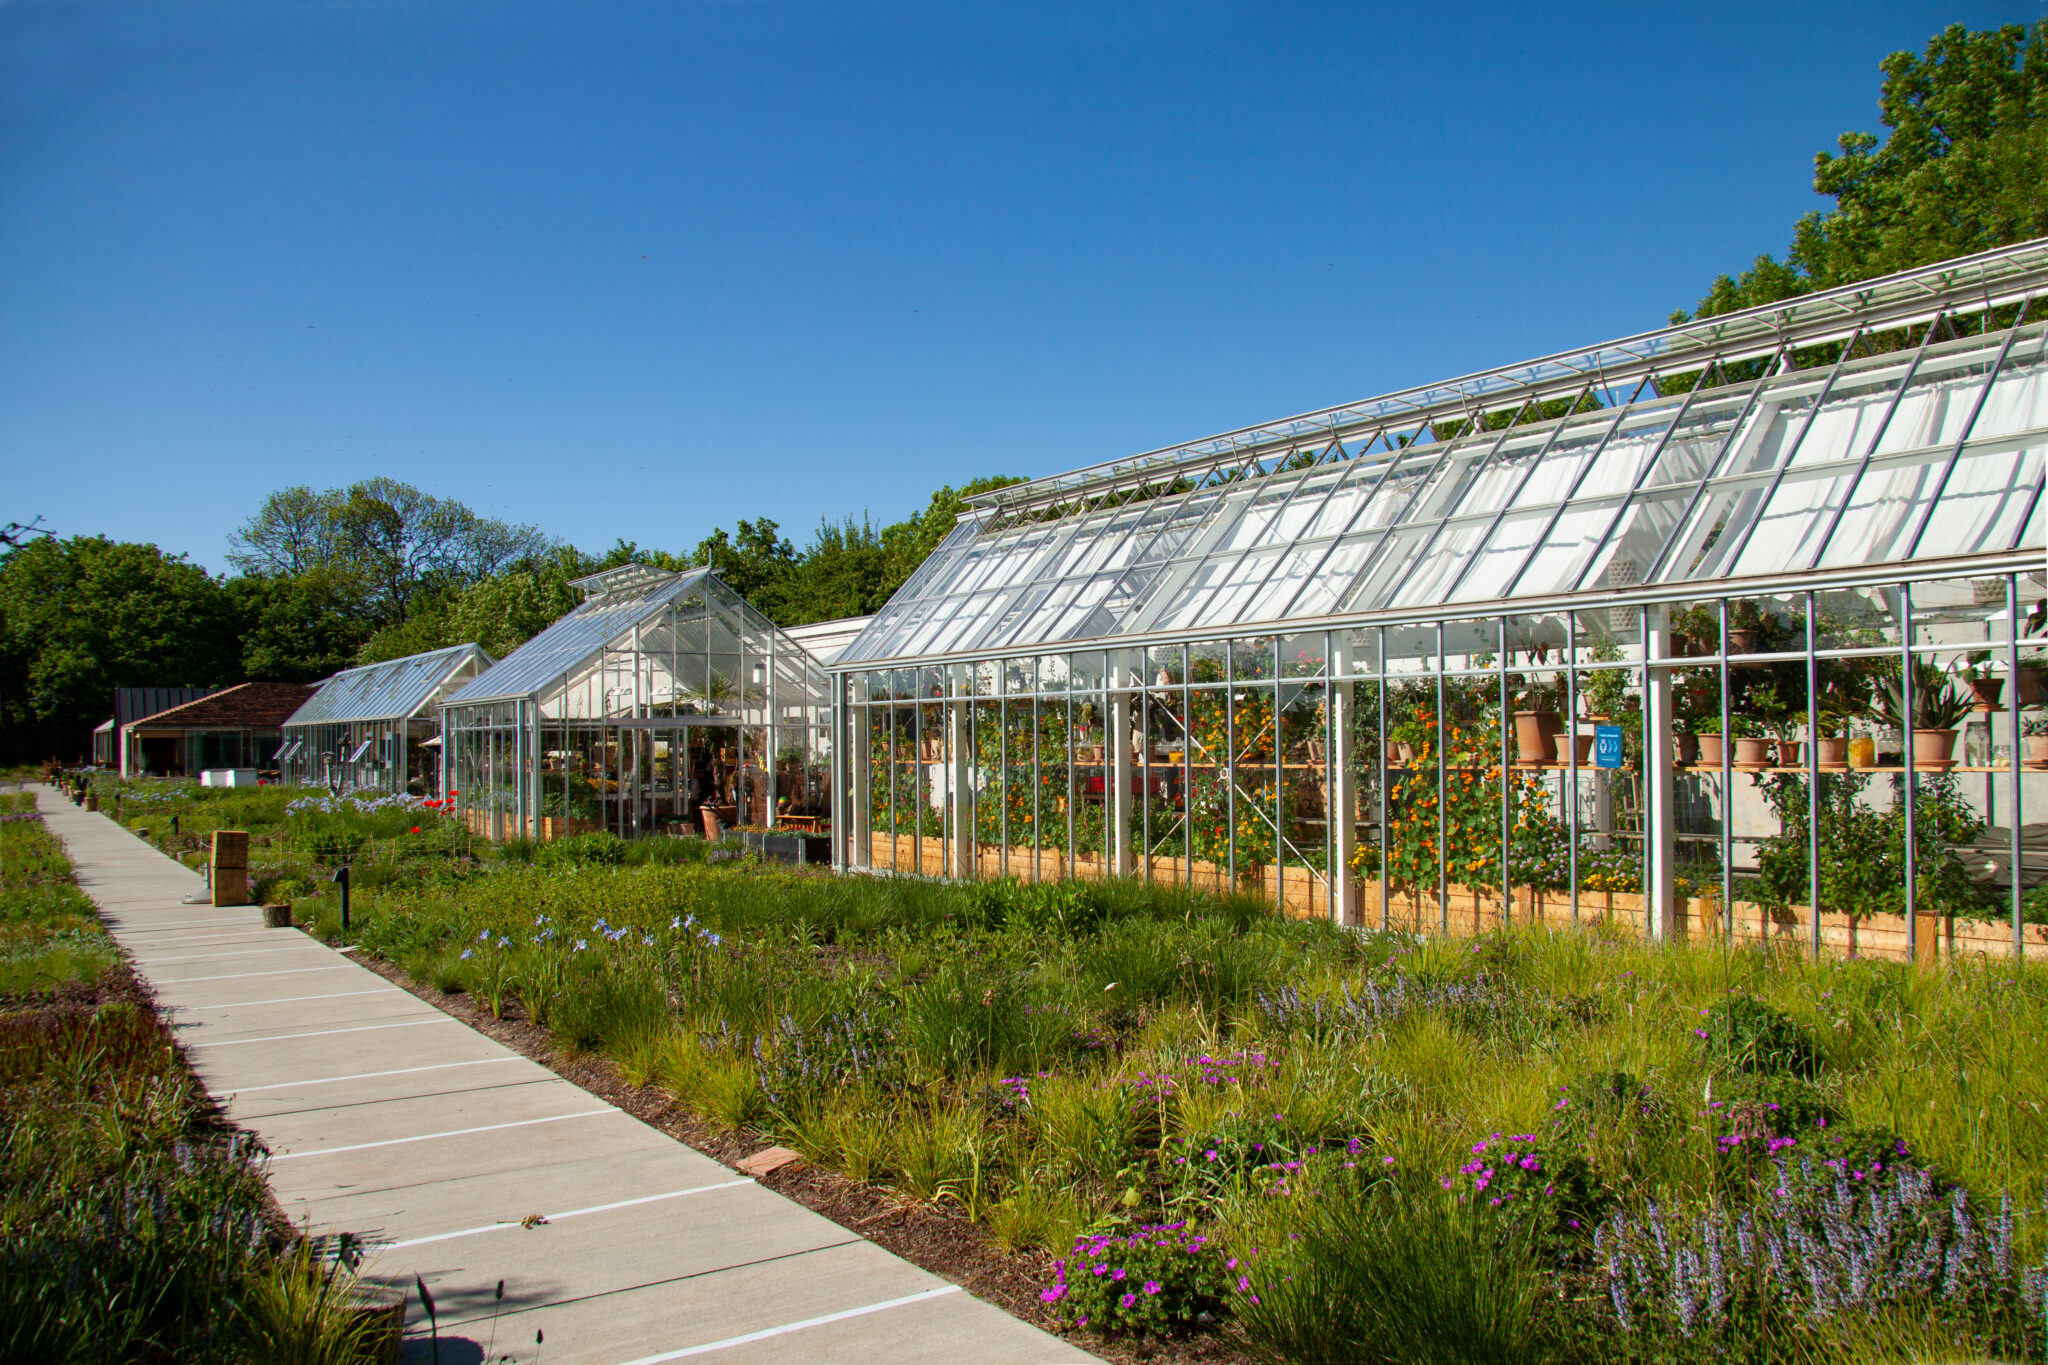 The,New,Noma.,An,Exterior,View,Of,Greenhouses,At,The